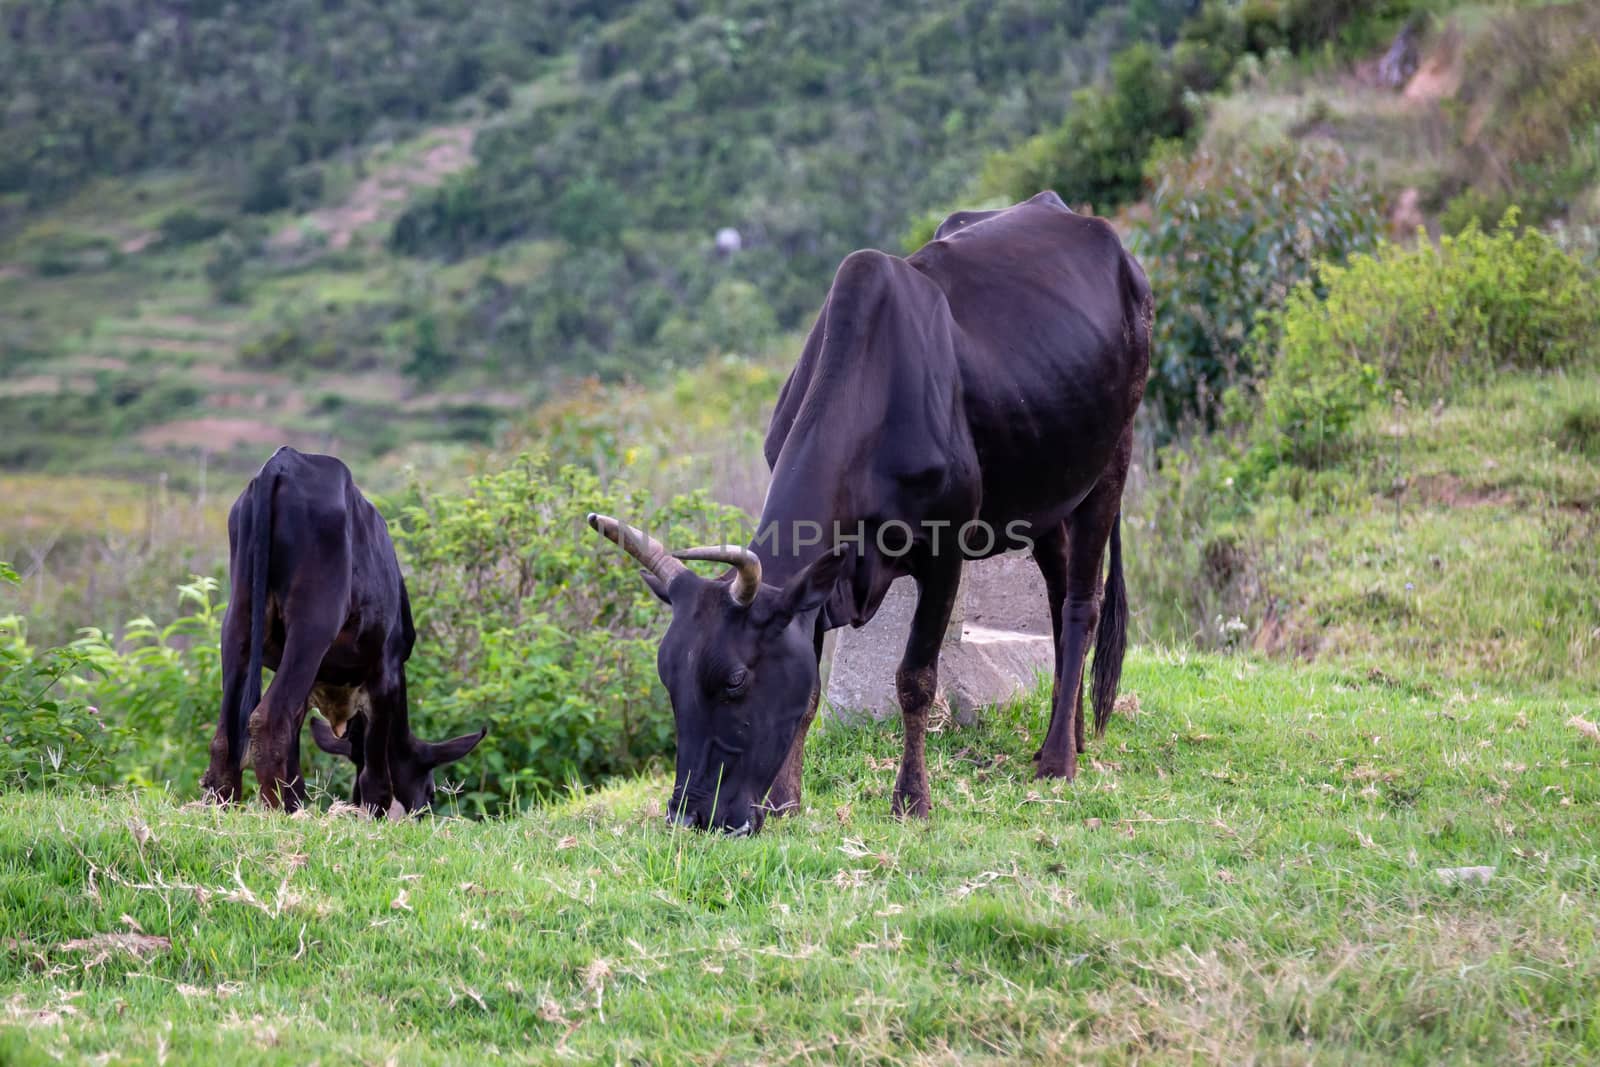 The Zebu cattle in the pasture on the island of Madagascar